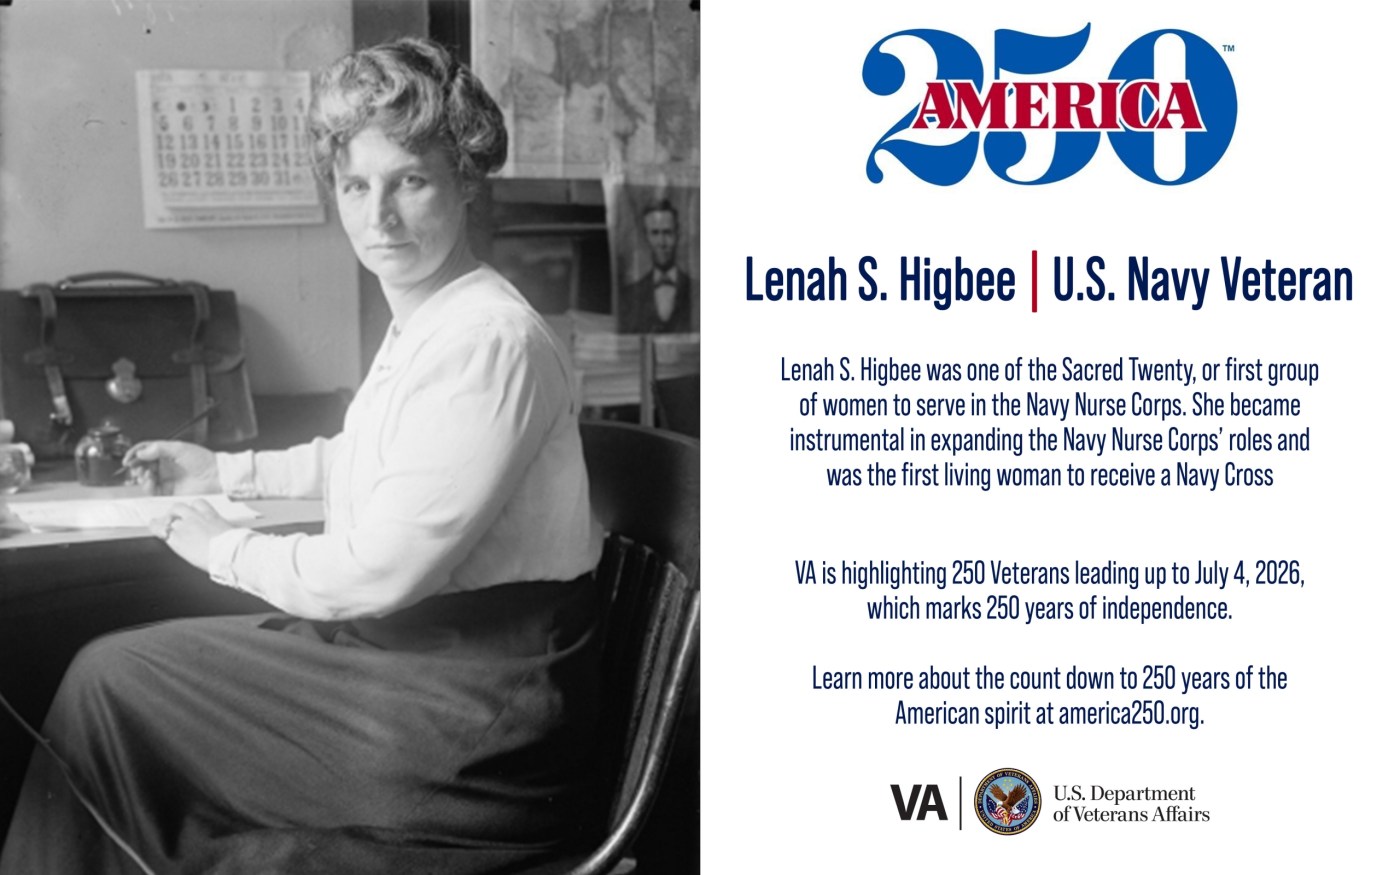 This week’s America250 salute is Navy Veteran Lenah S. Higbee, the first living female recipient of the Navy Cross.